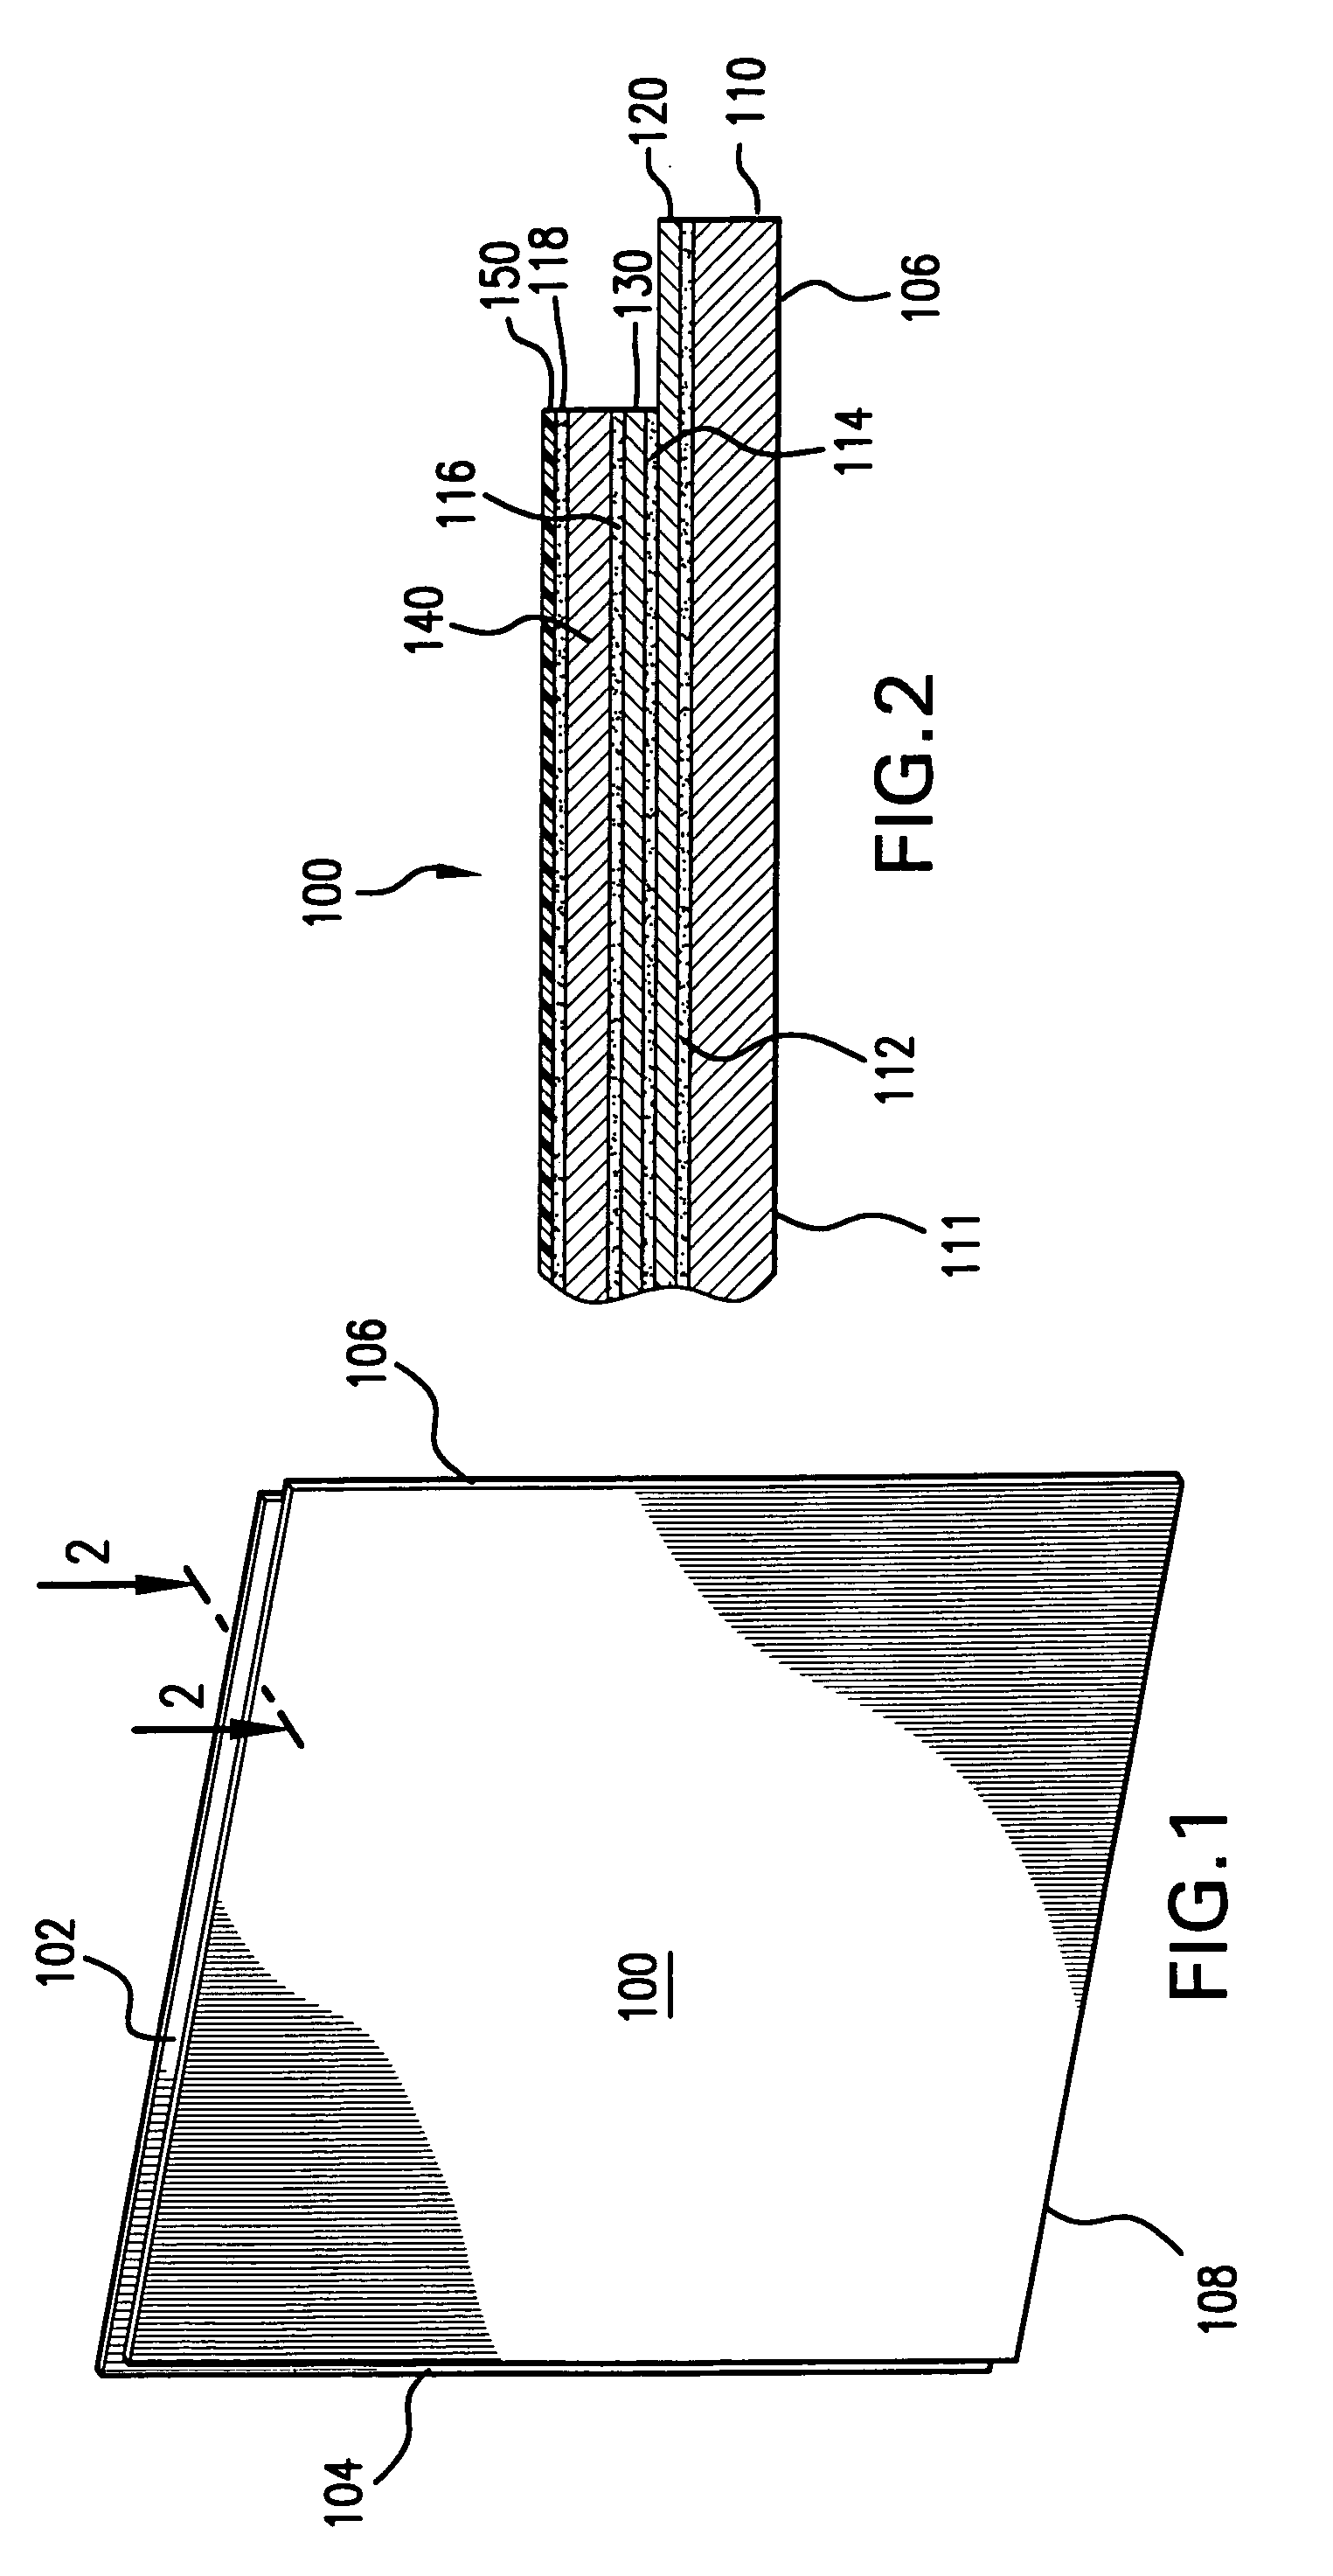 Radiation shielding panel construction system and panels therefore